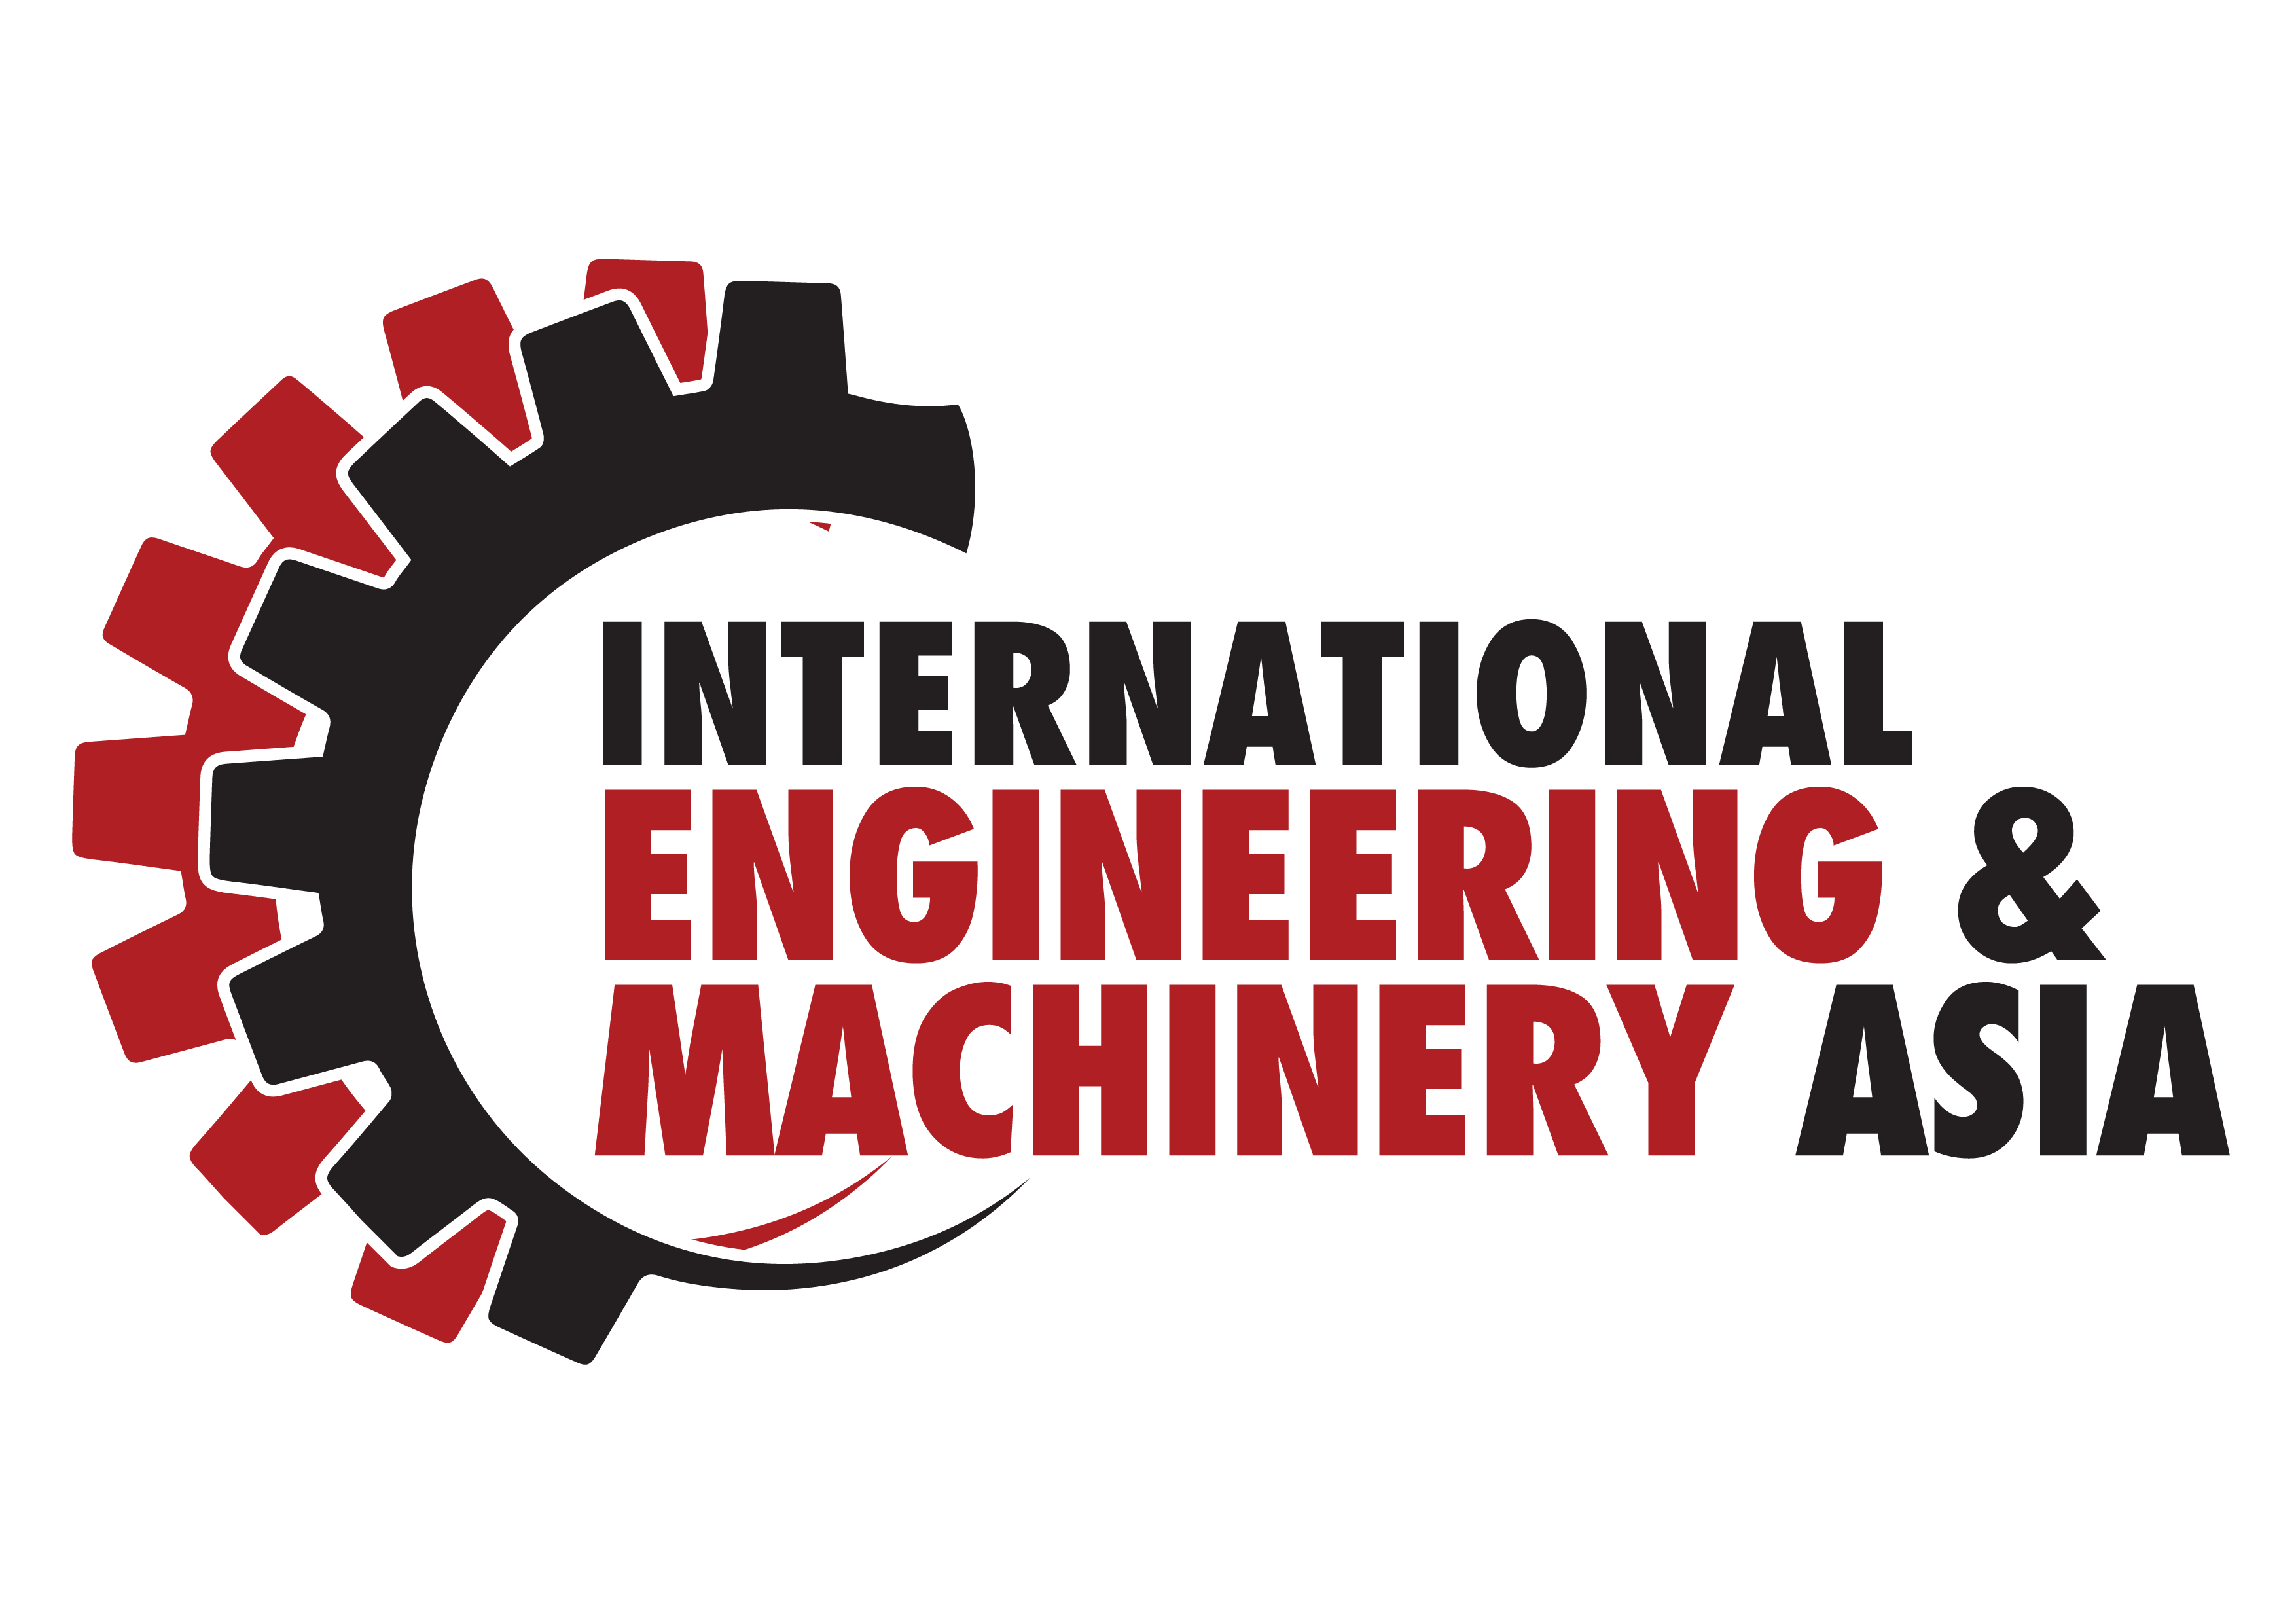 Engineering Asia - PAKISTAN'S LEADING BUSINESS EXHIBITION ON ENGINEERING, MACHINERY TOOLS & ALLIED PRODUCTS